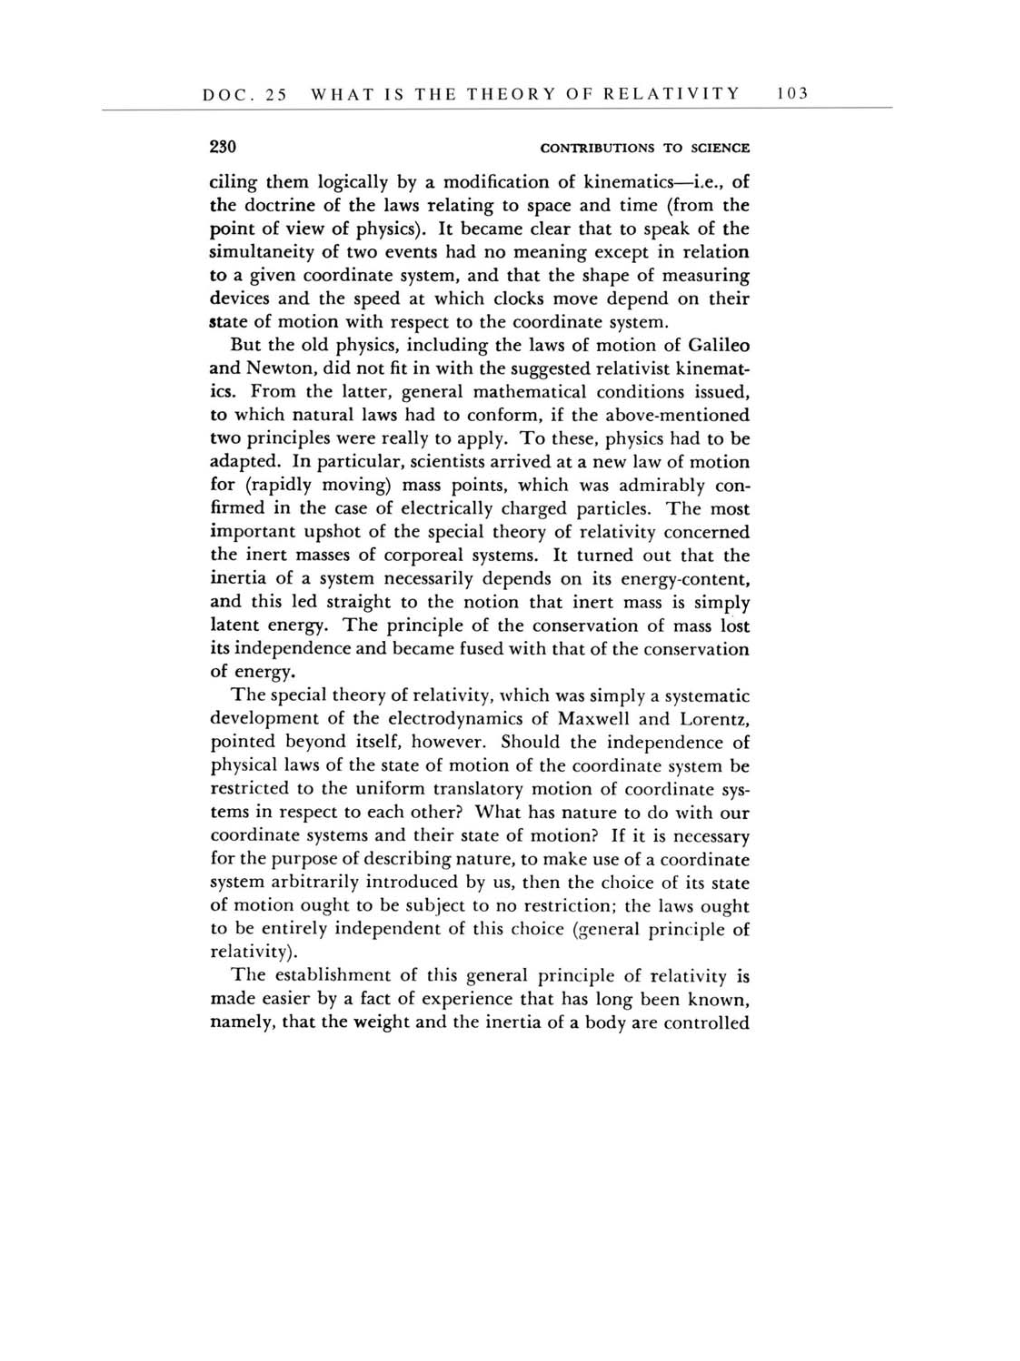 Volume 7: The Berlin Years: Writings, 1918-1921 (English translation supplement) page 103